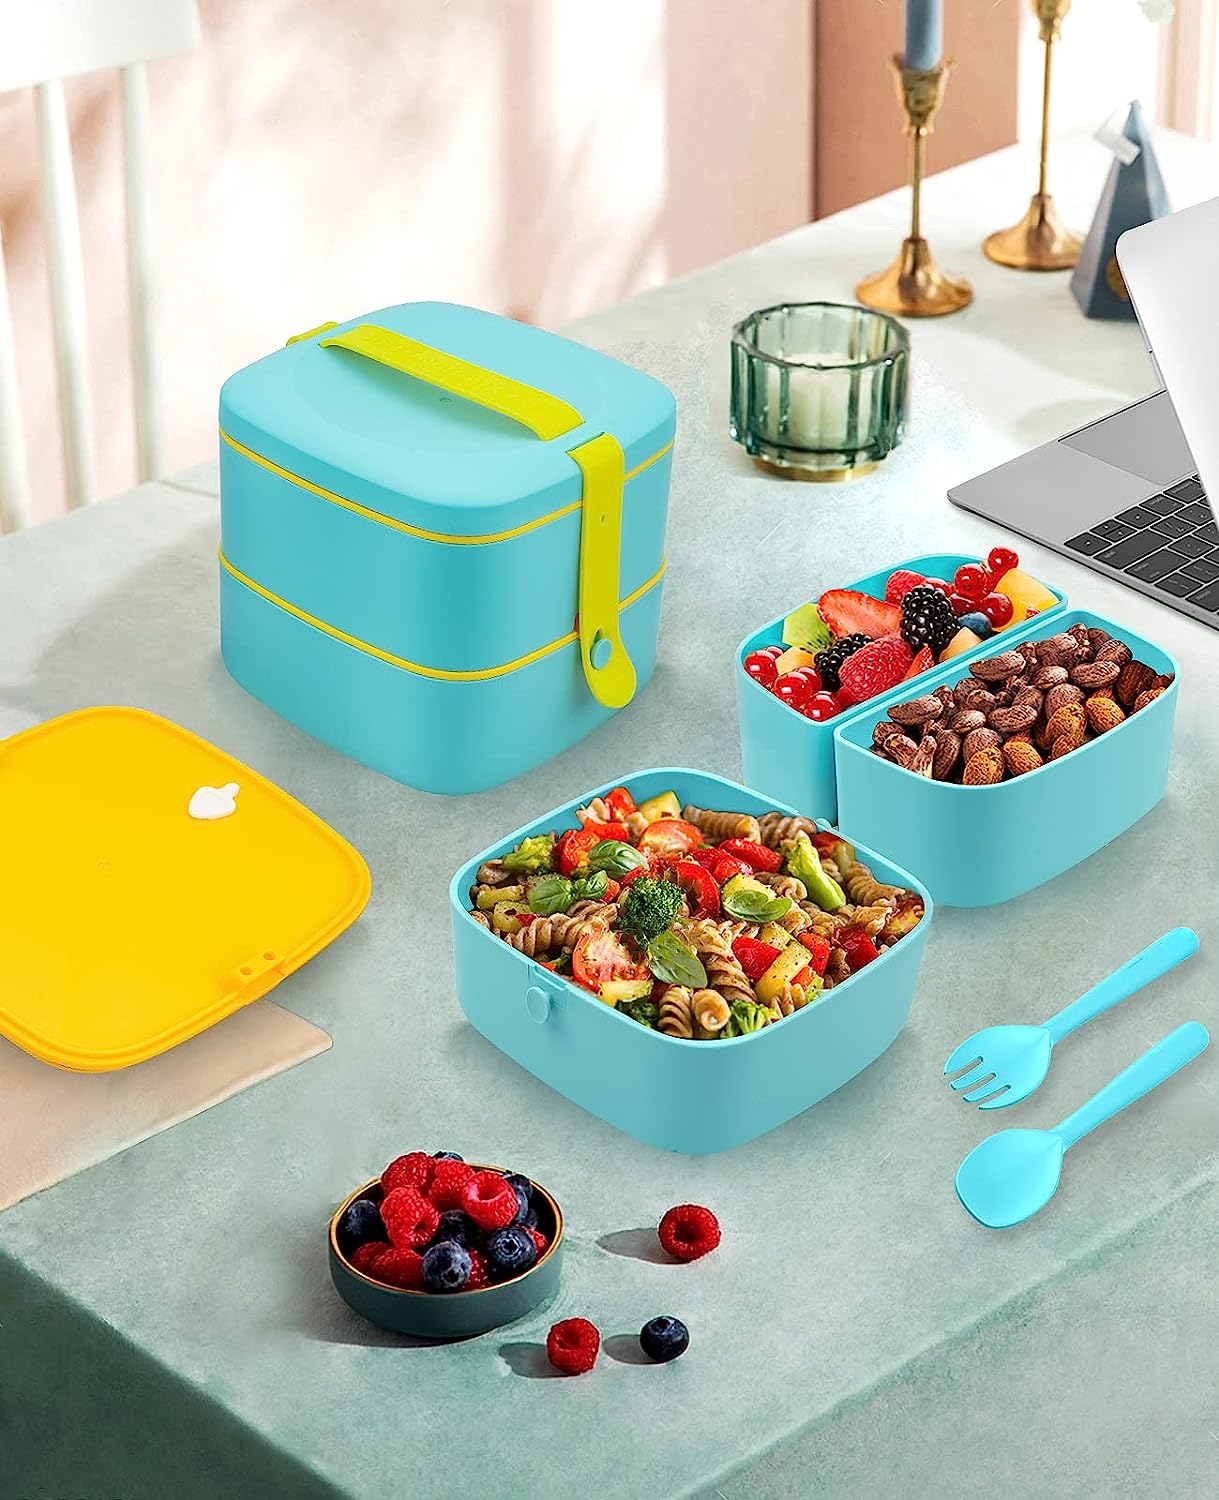 6 Compartment Lunch Boxes. Bento Box Lunchbox Snack Containers for